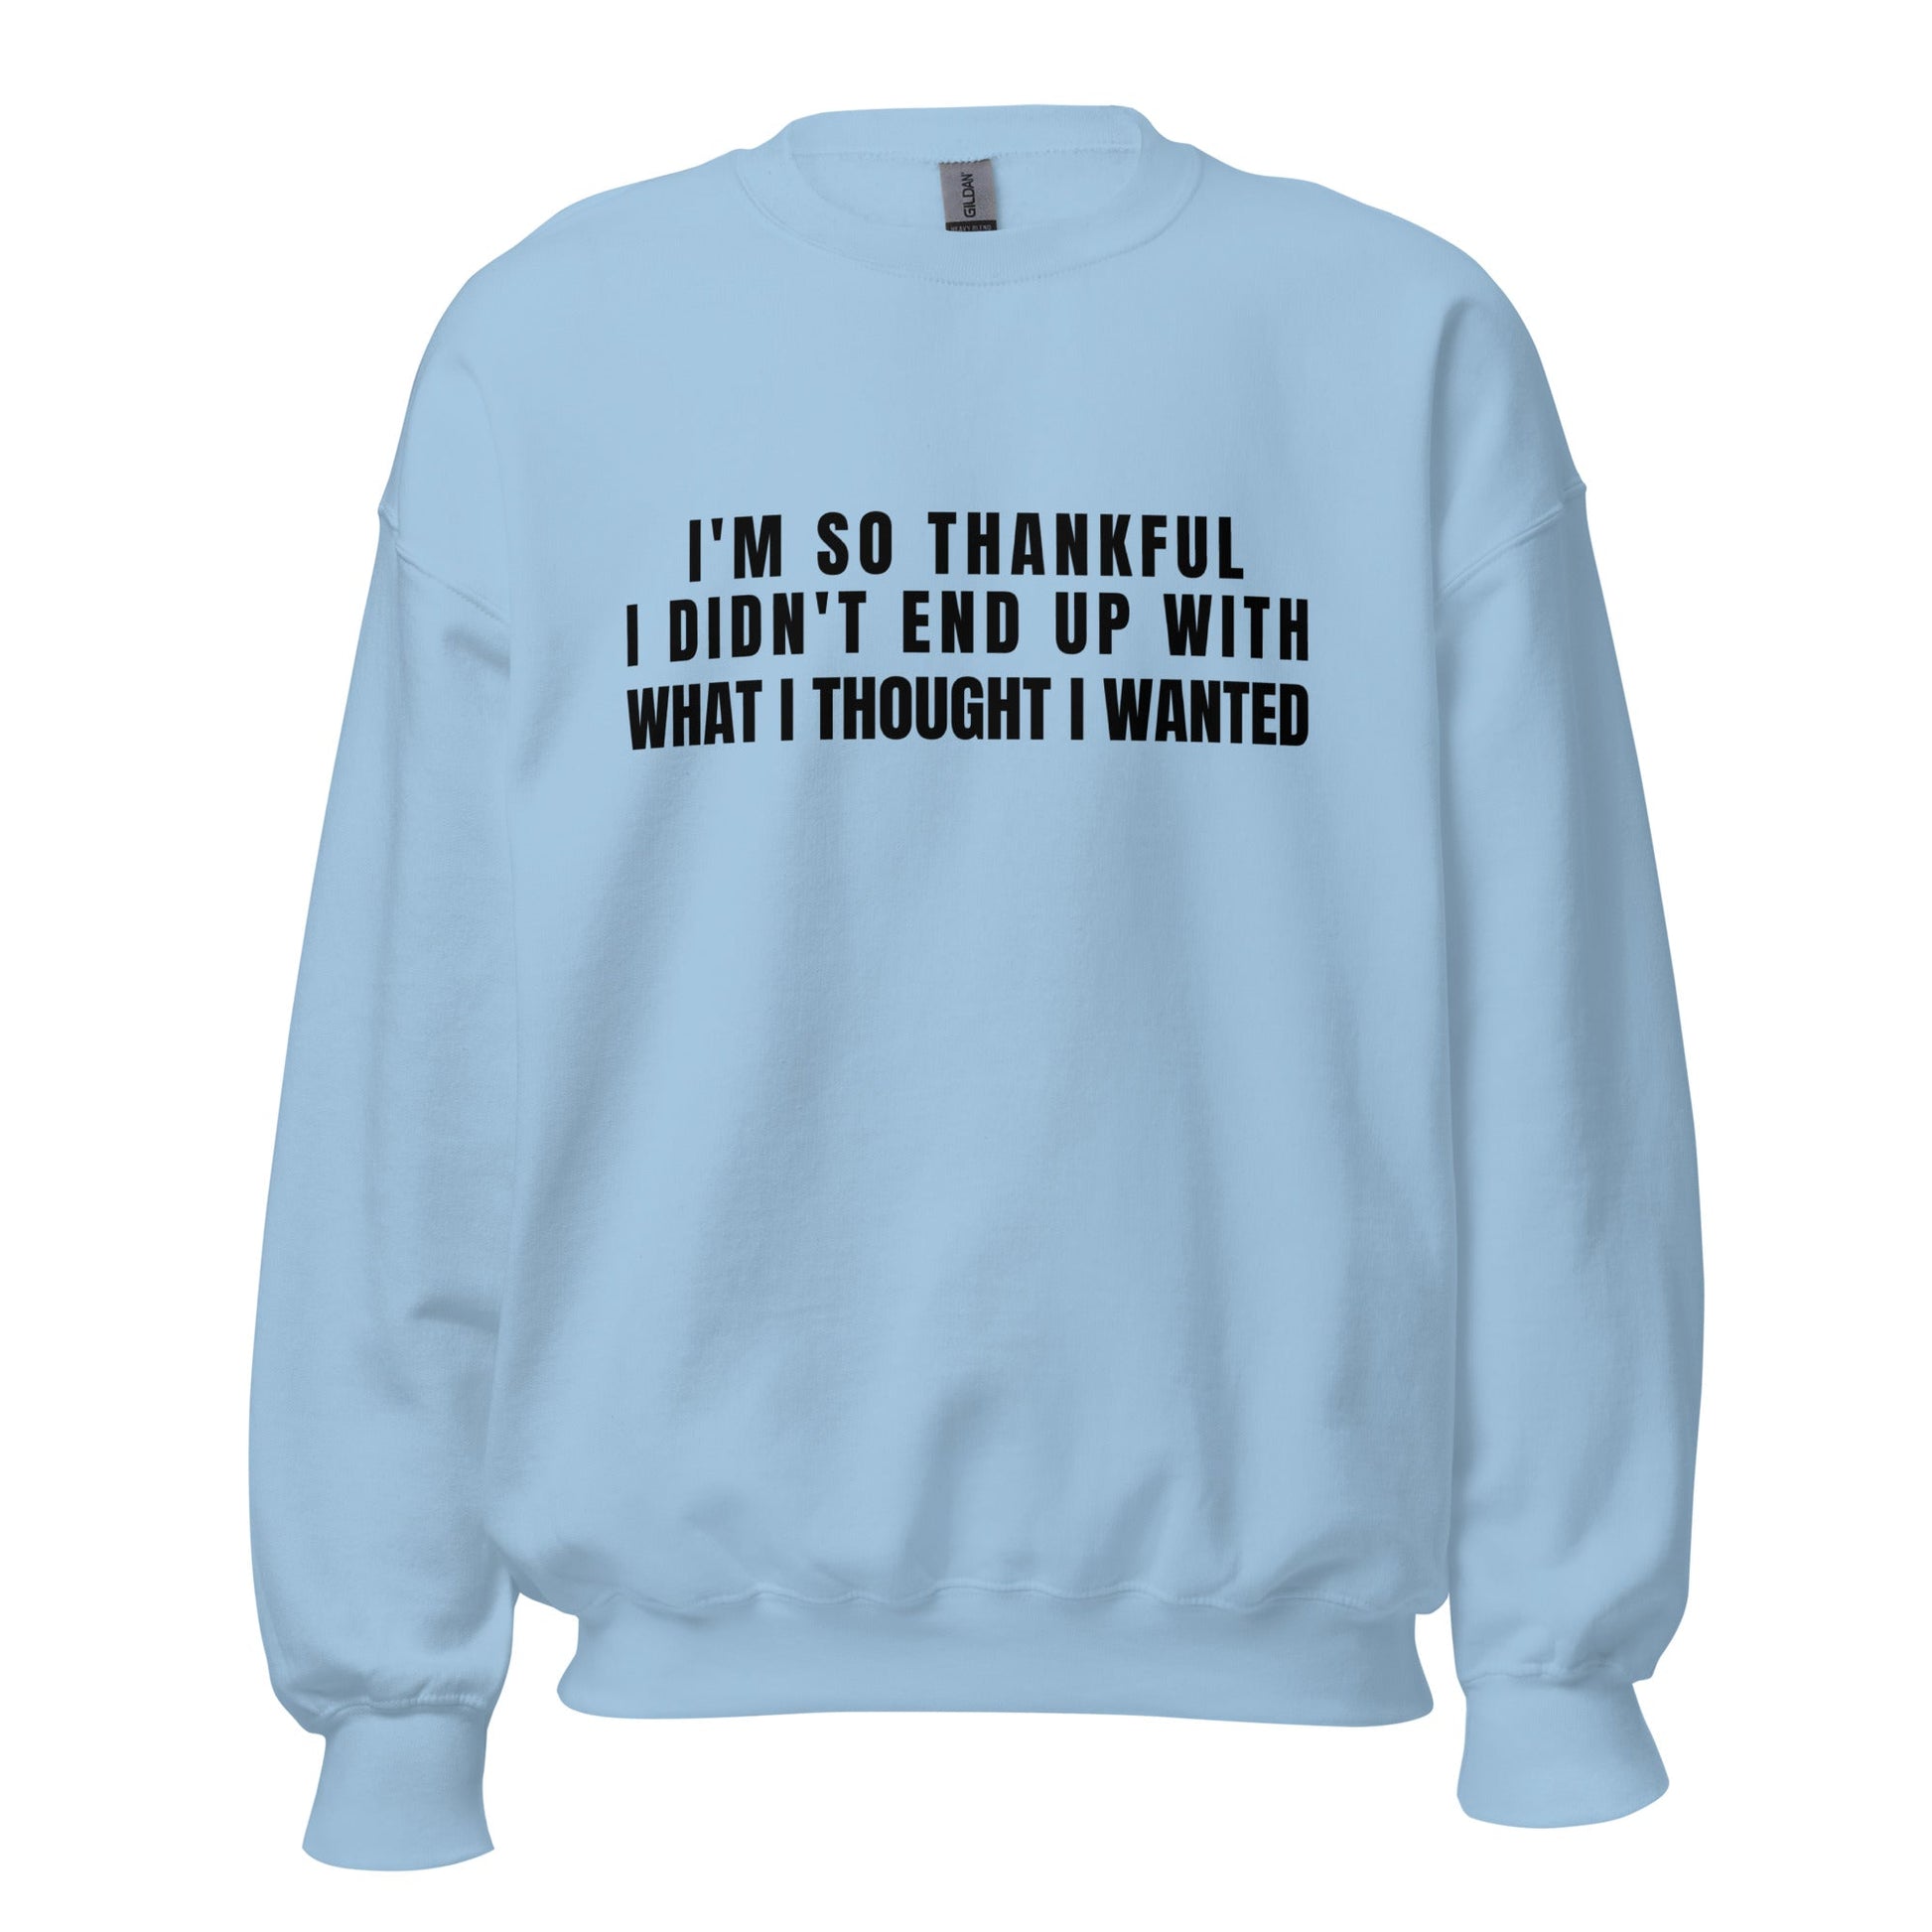 I'm So Thankful I Didn't End Up With What I Thought I Wanted Unisex Sweatshirt | For a Slim Fit Order a Size Down - Catch This Tea Shirts